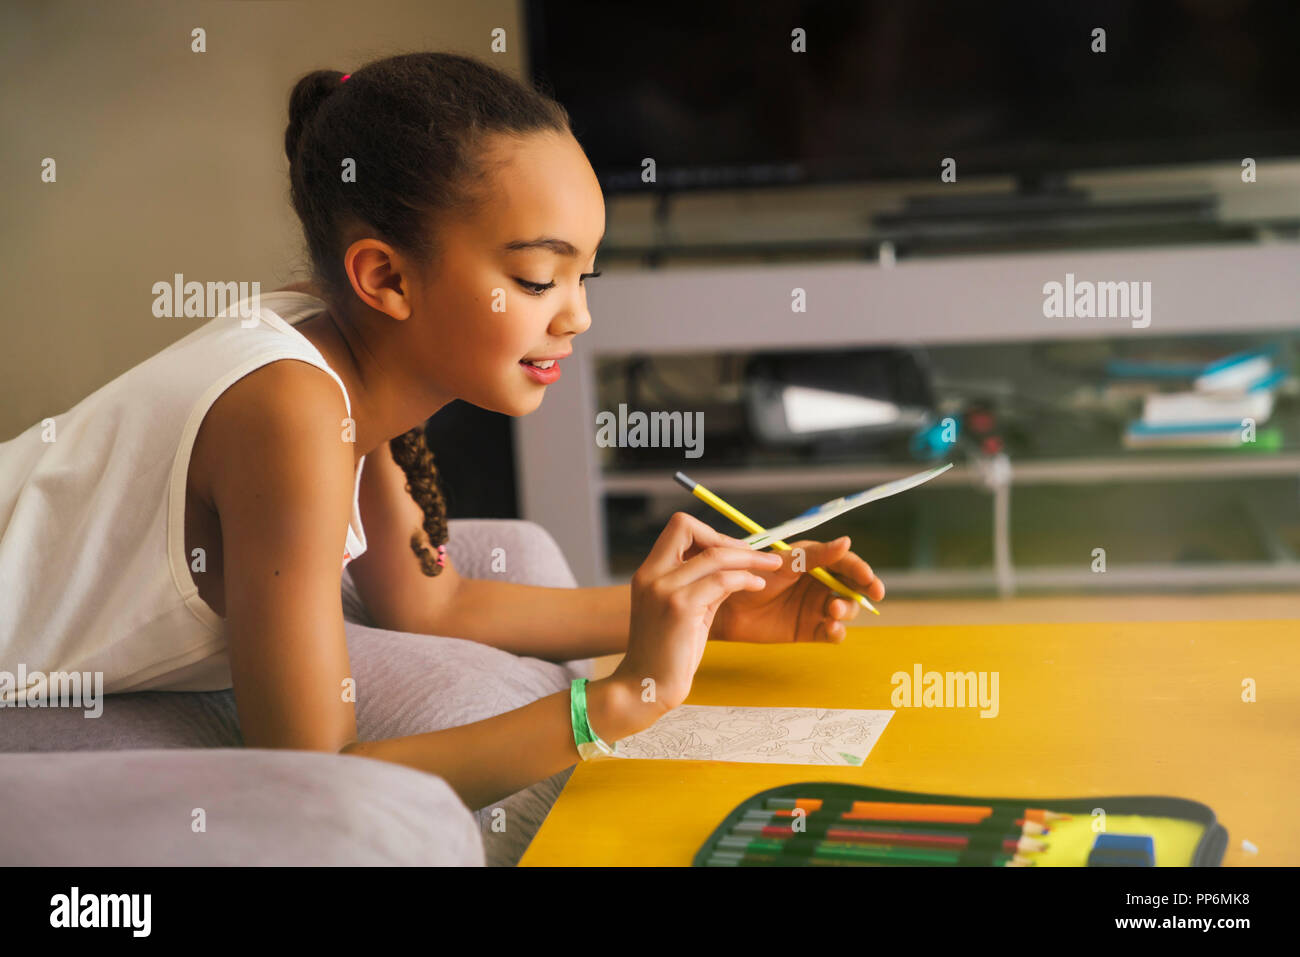 Tween girl drawing with colored pencils in living room Stock Photo